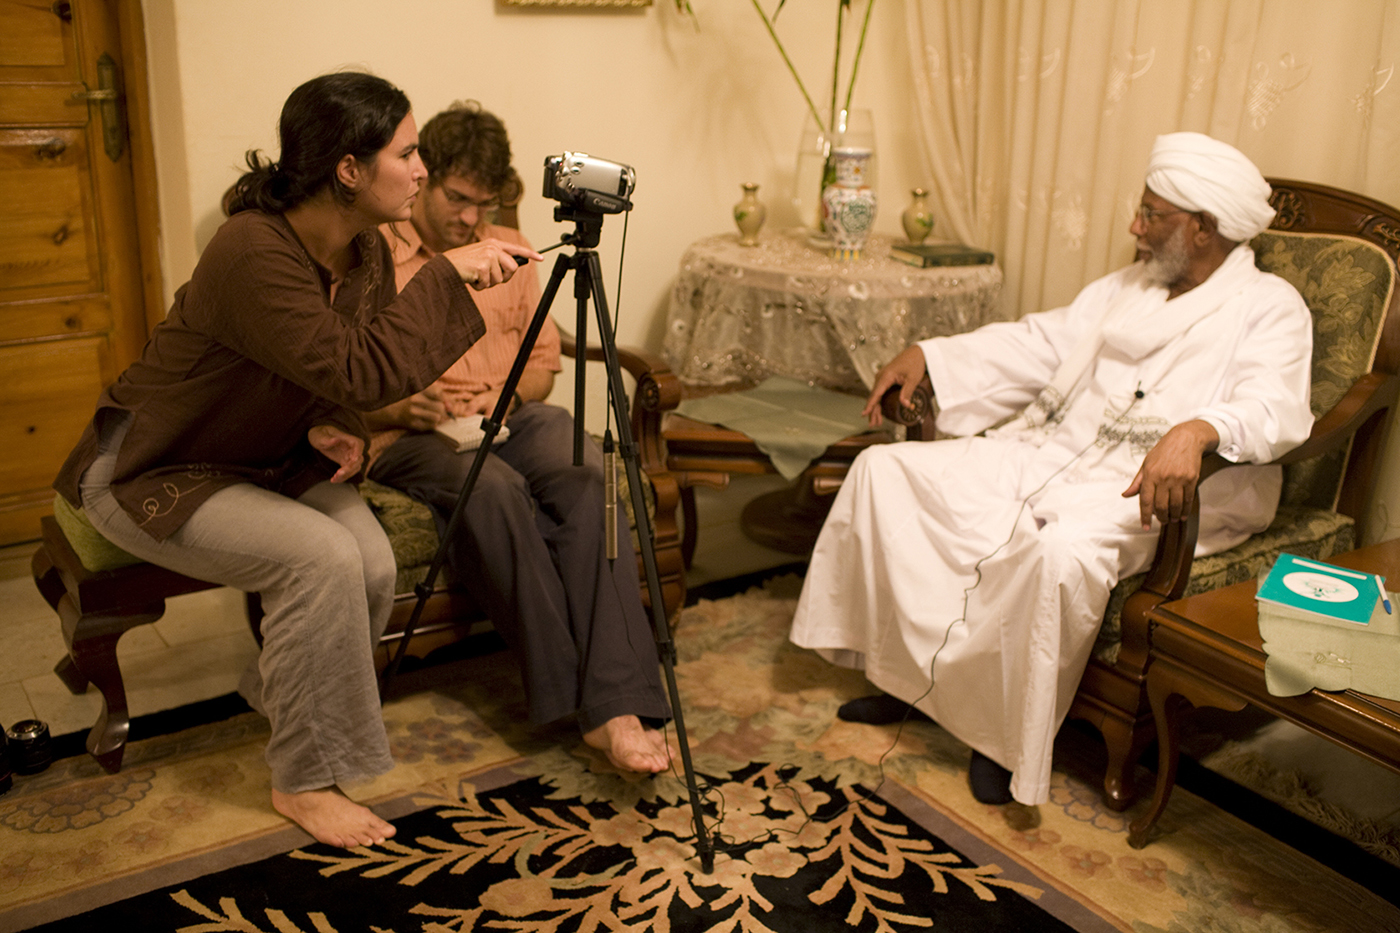 Shoes off for interviewing one of Sudan’s most dangerous, intelligent and whimsical intellectuals, Hassan Al-Turabi. Khartoum, Sudan